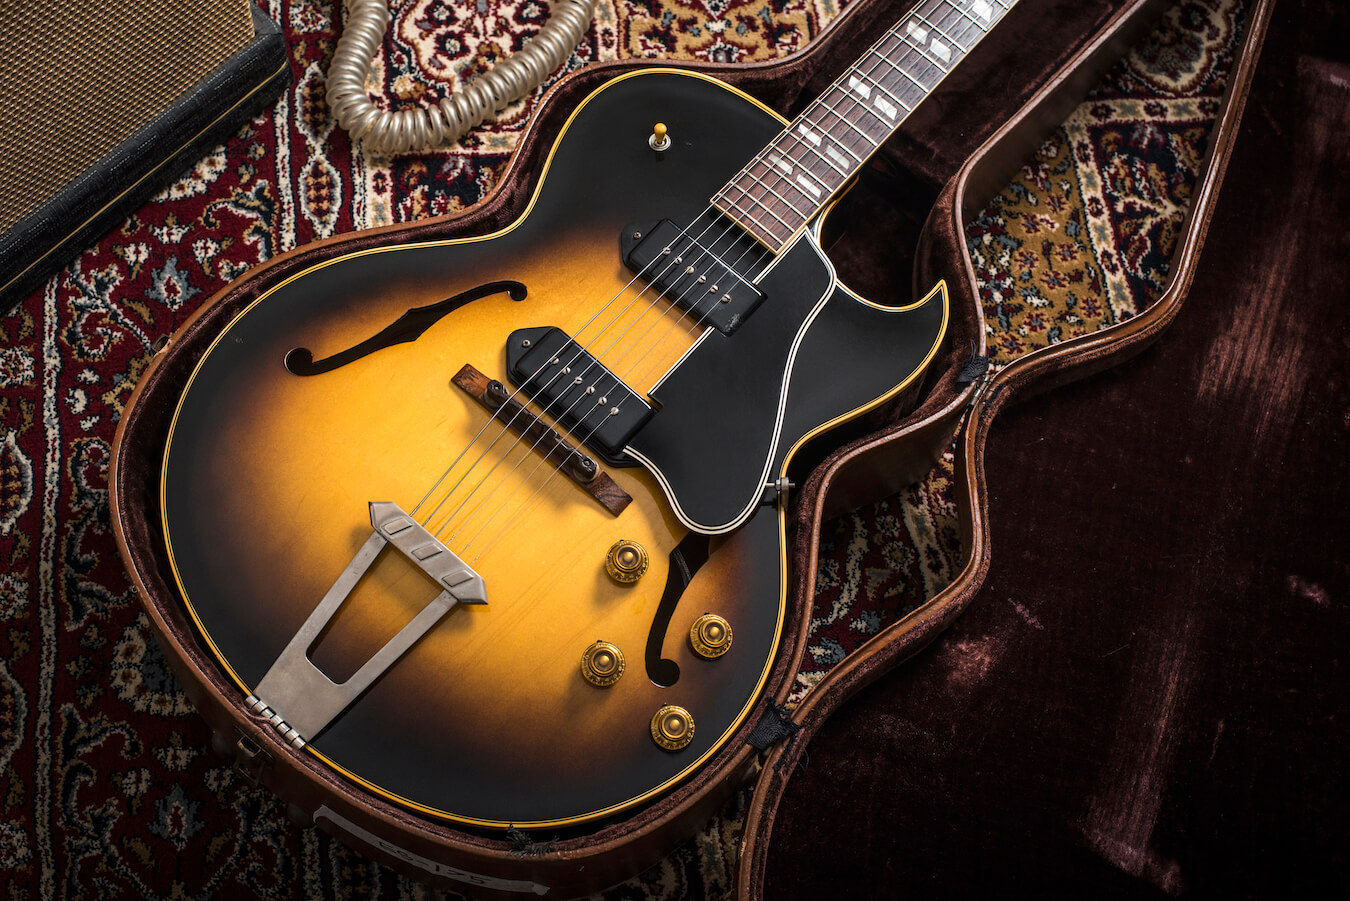 This 1956 Gibson ES-175D one of Kalamazoo's finest